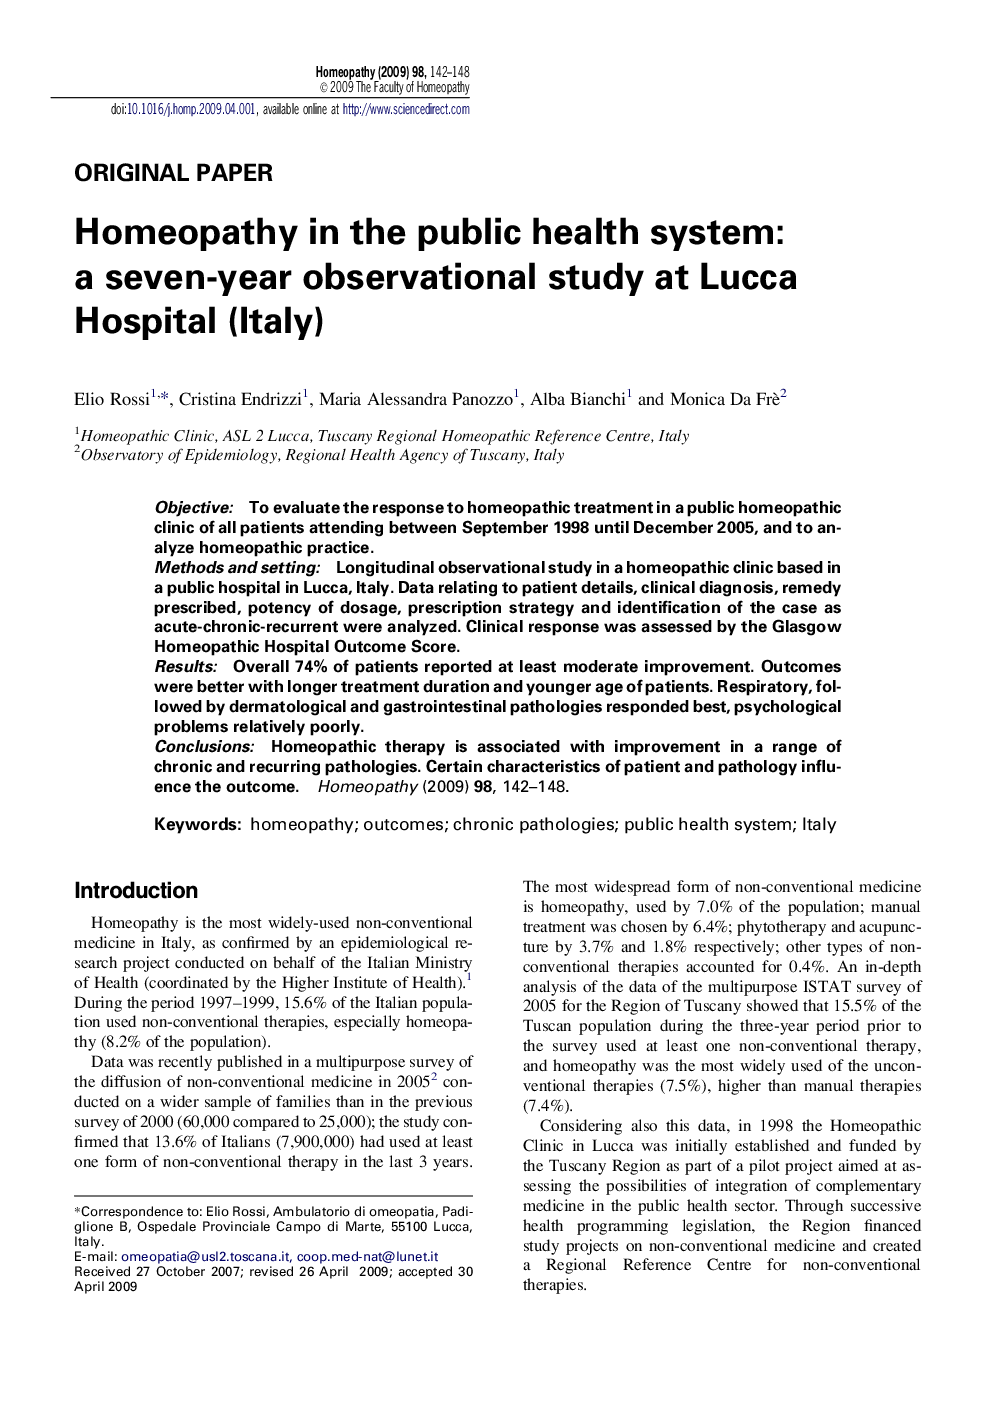 Homeopathy in the public health system: a seven-year observational study at Lucca Hospital (Italy)